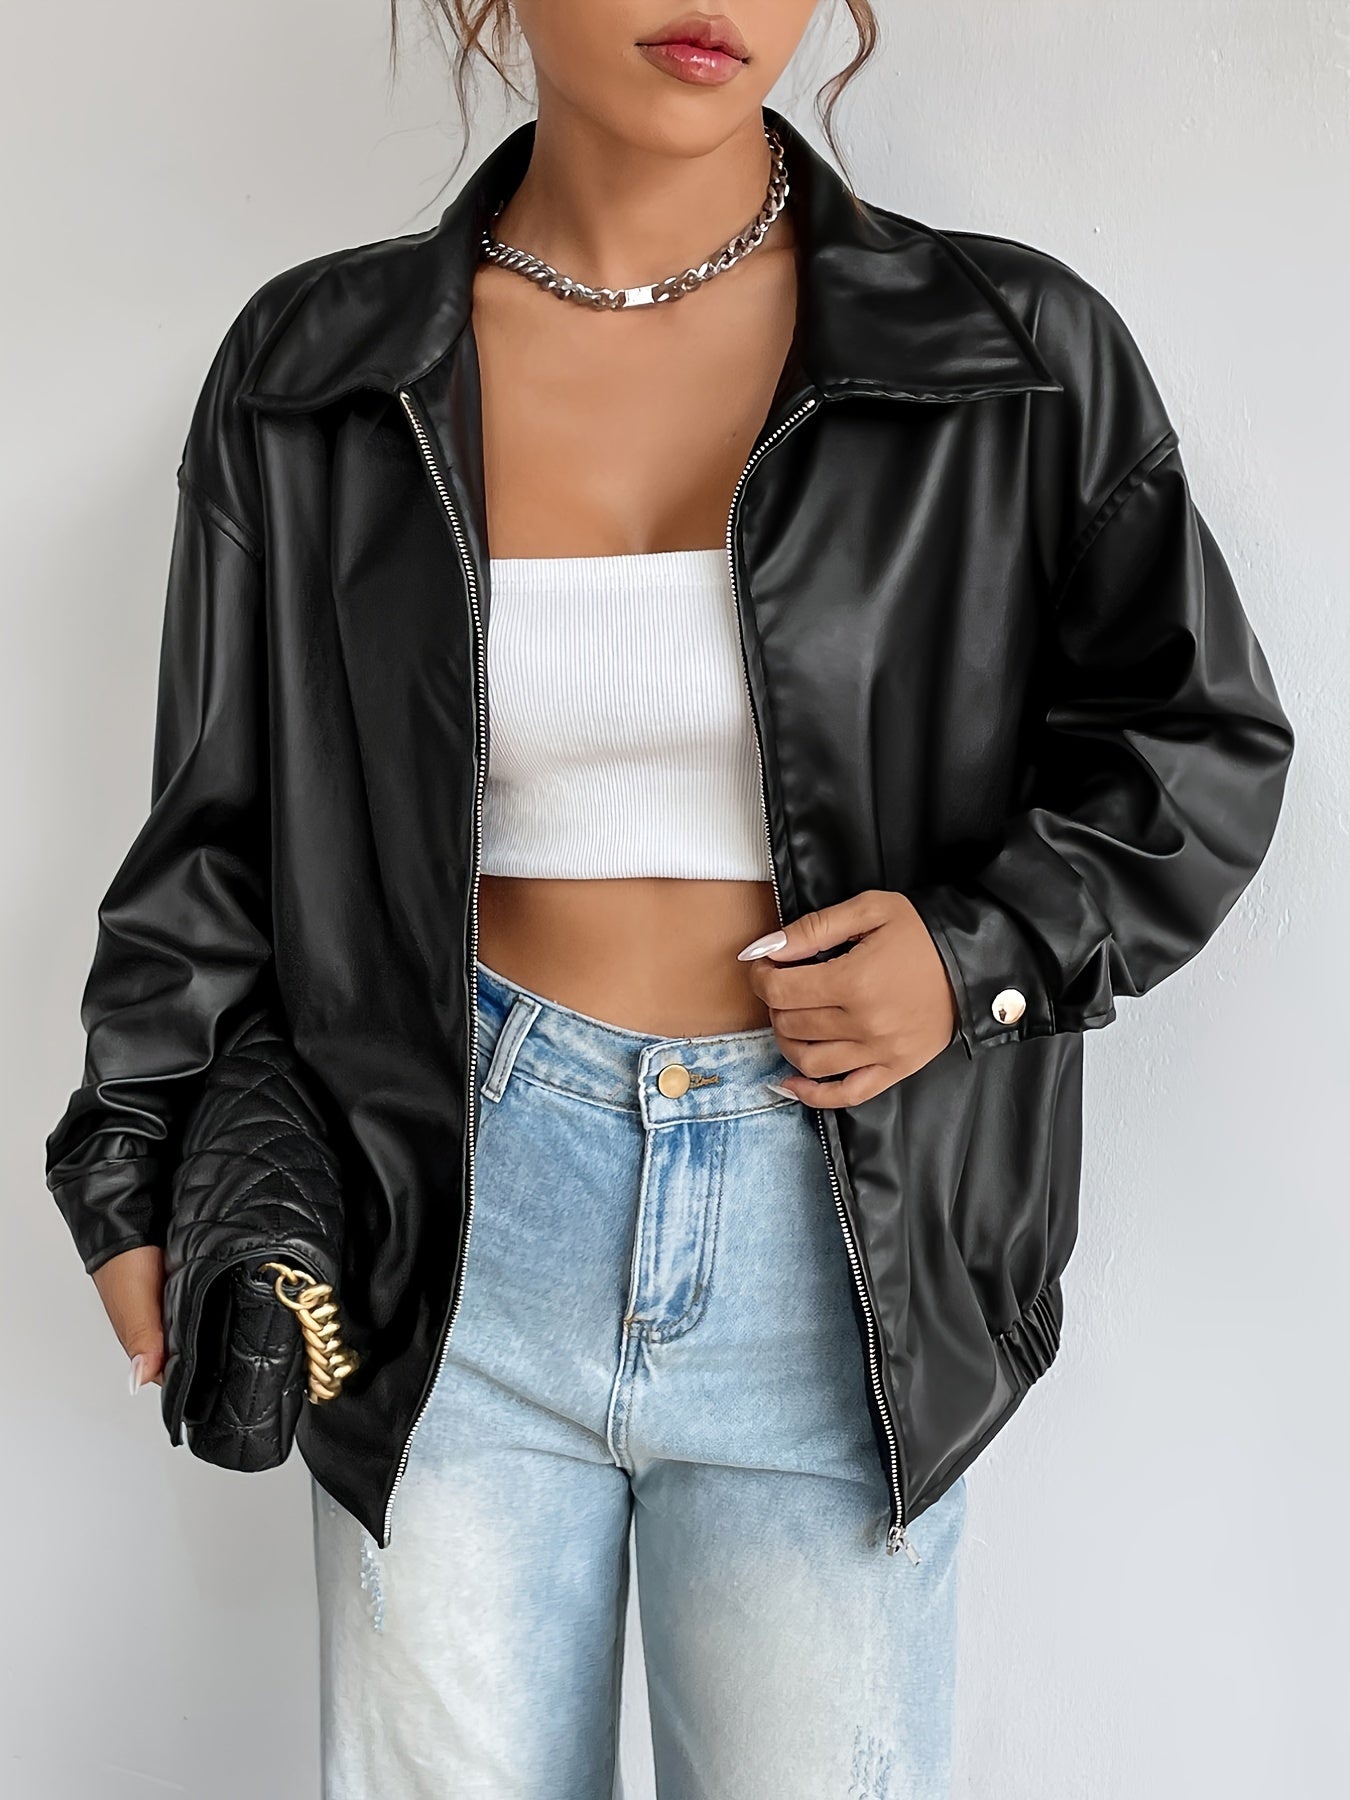 Antmvs Solid Zipper Front PU Leather Jacket, Casual Y2K Long Sleeve Jacket For Spring & Fall, Women's Clothing